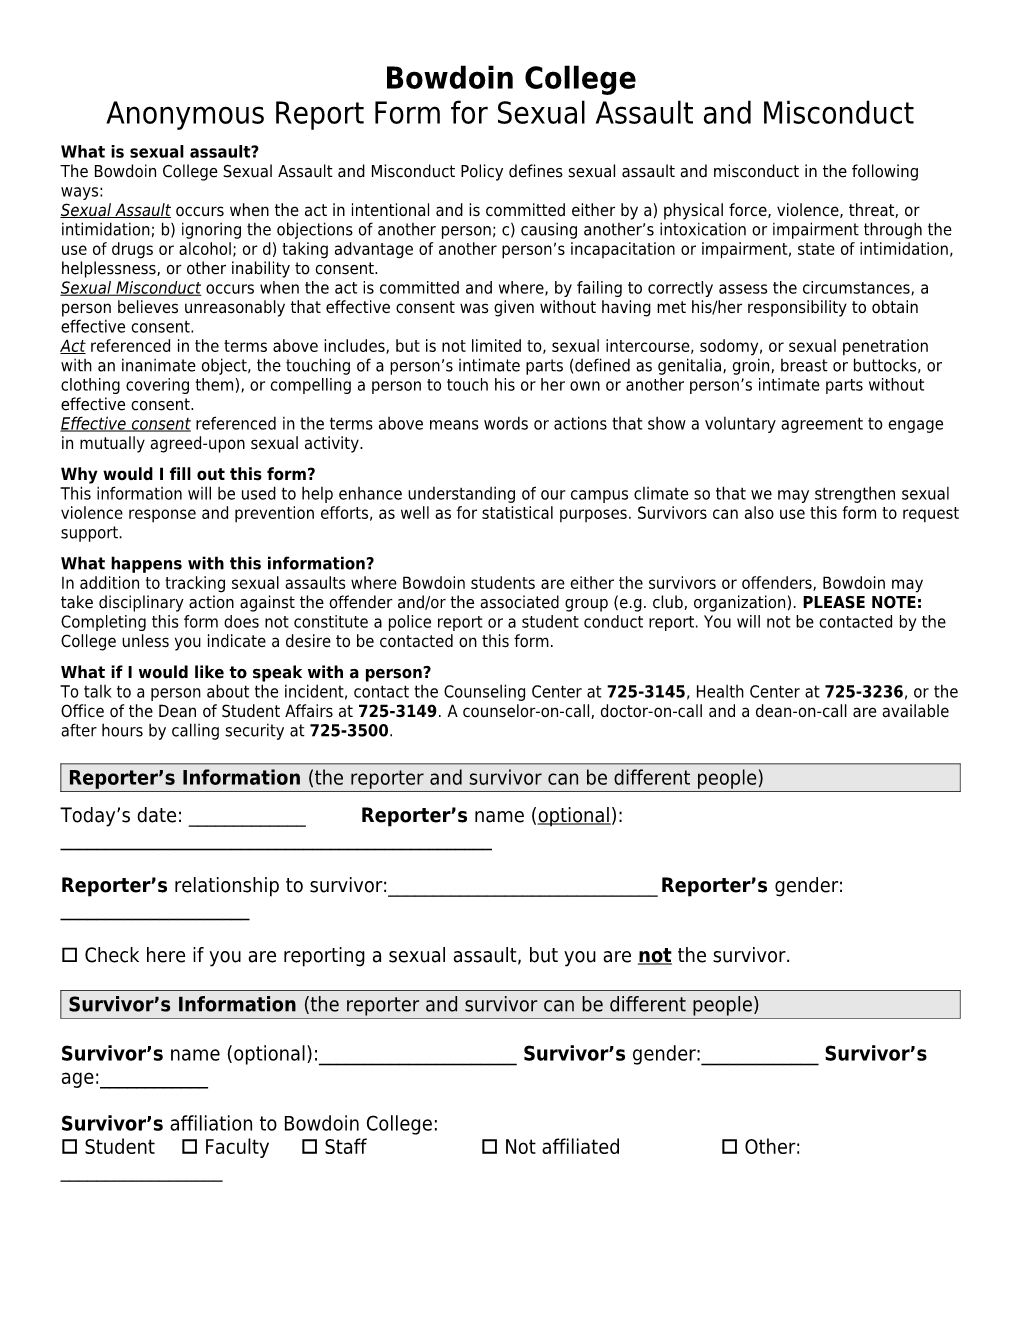 Generic Anonymous Report Form for Sexual Or Relationship Violence